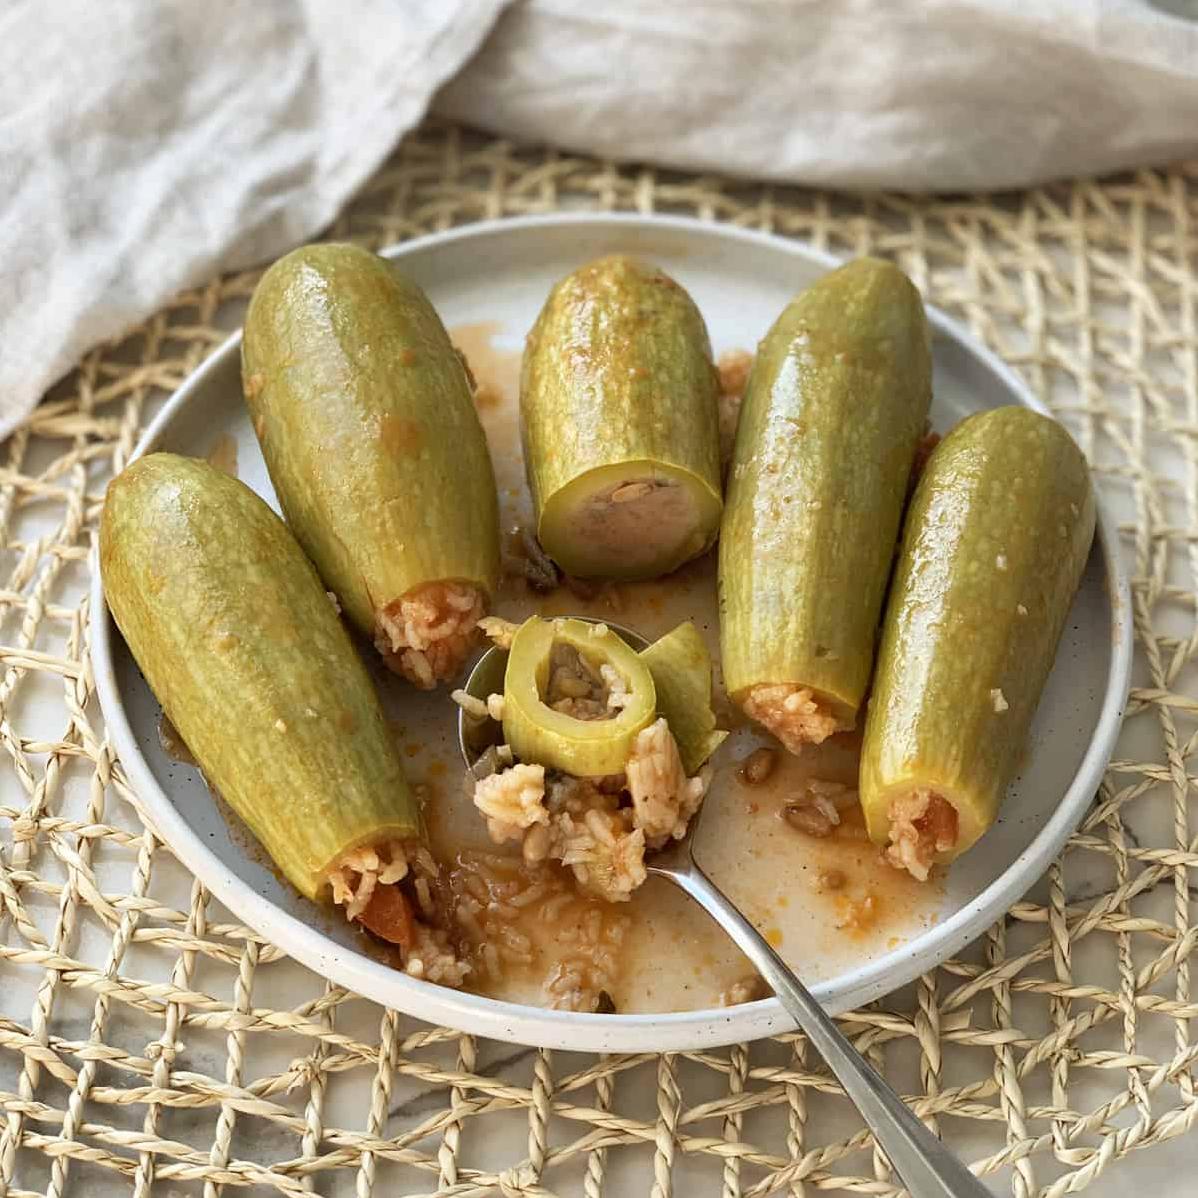  The entire family will love this stuffed squash dish.